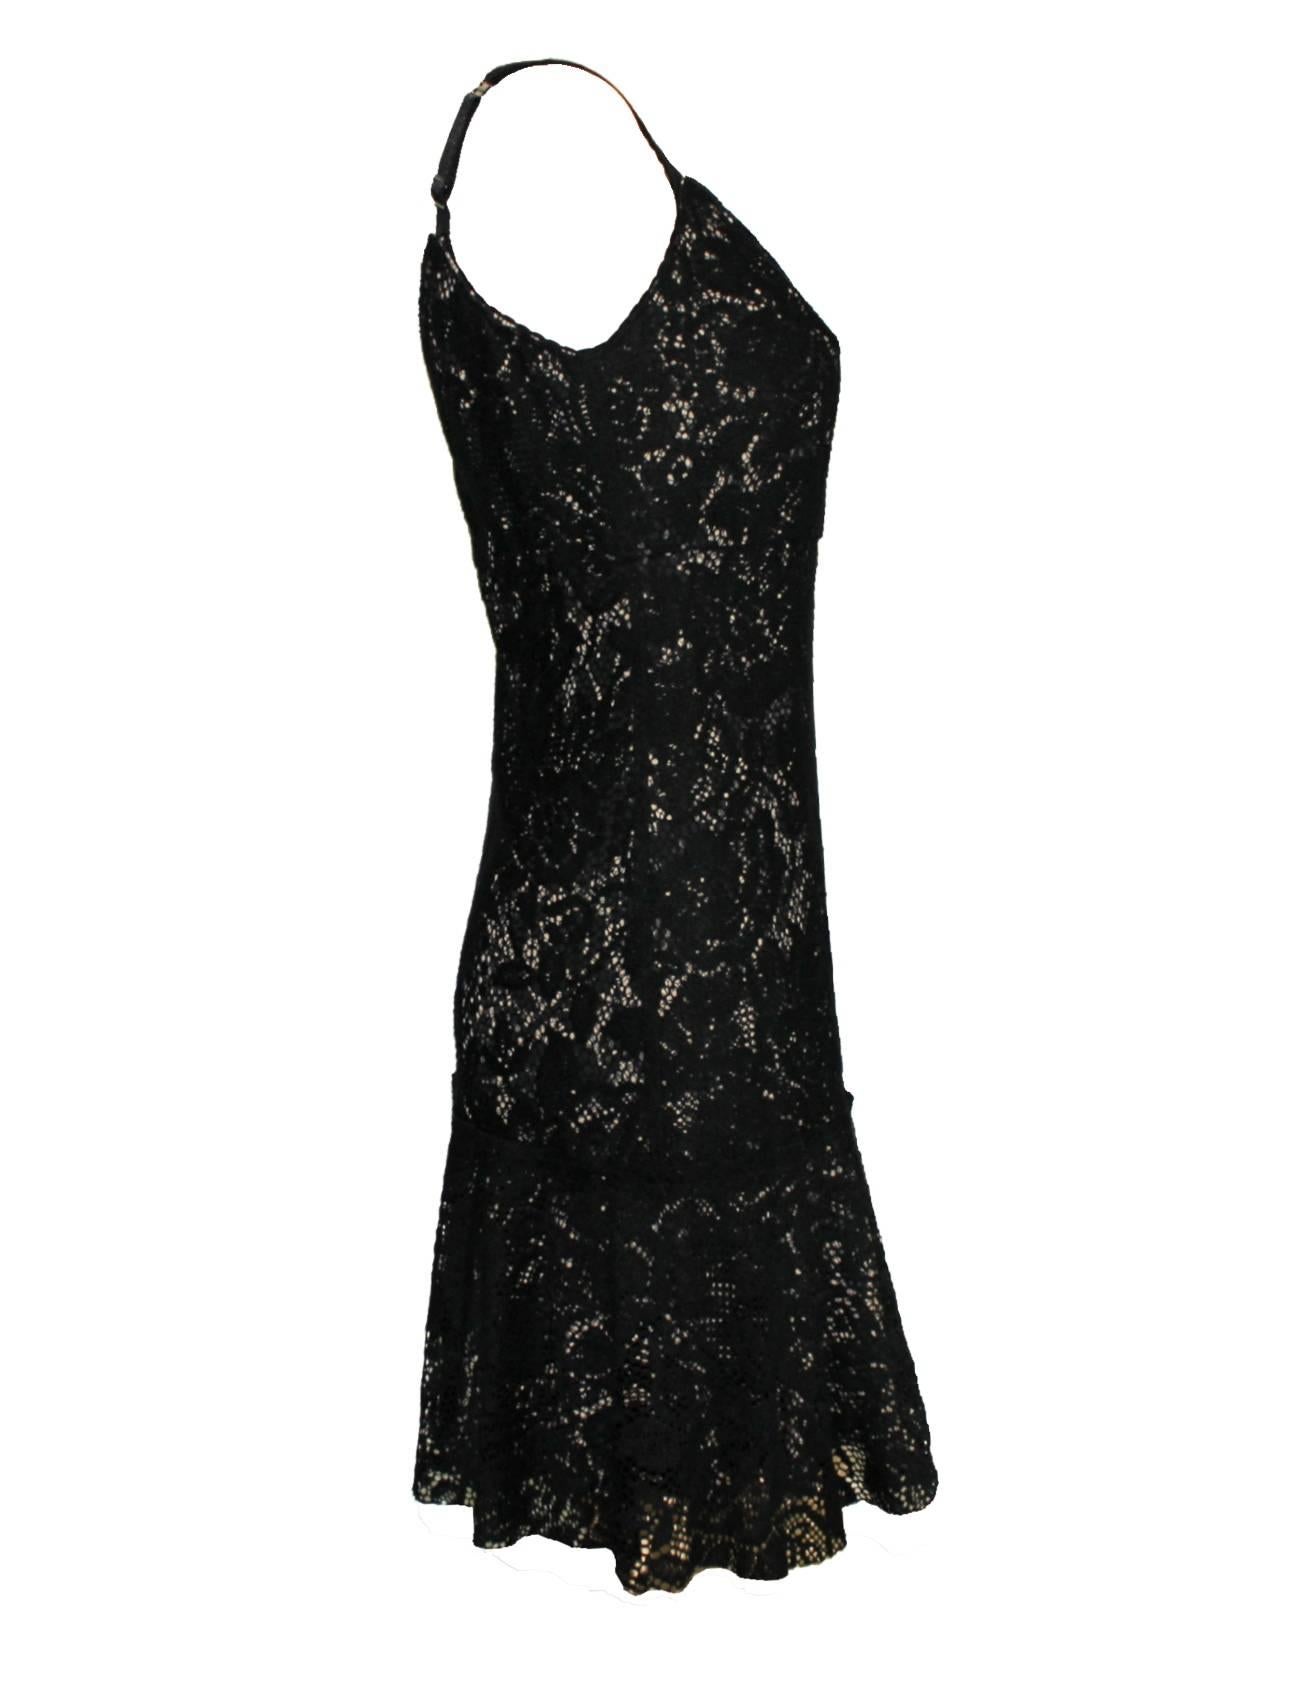 
DOLCE & GABBANA BLACK CROCHET KNIT LACE PRINT SILK DRESS

DETAILS:

    A DOLCE & GABBANA classic signature piece that will last you for years
    From Dolce & Gabbana main line
    Made out of a fantastic soft black knitted lace
    Lined with